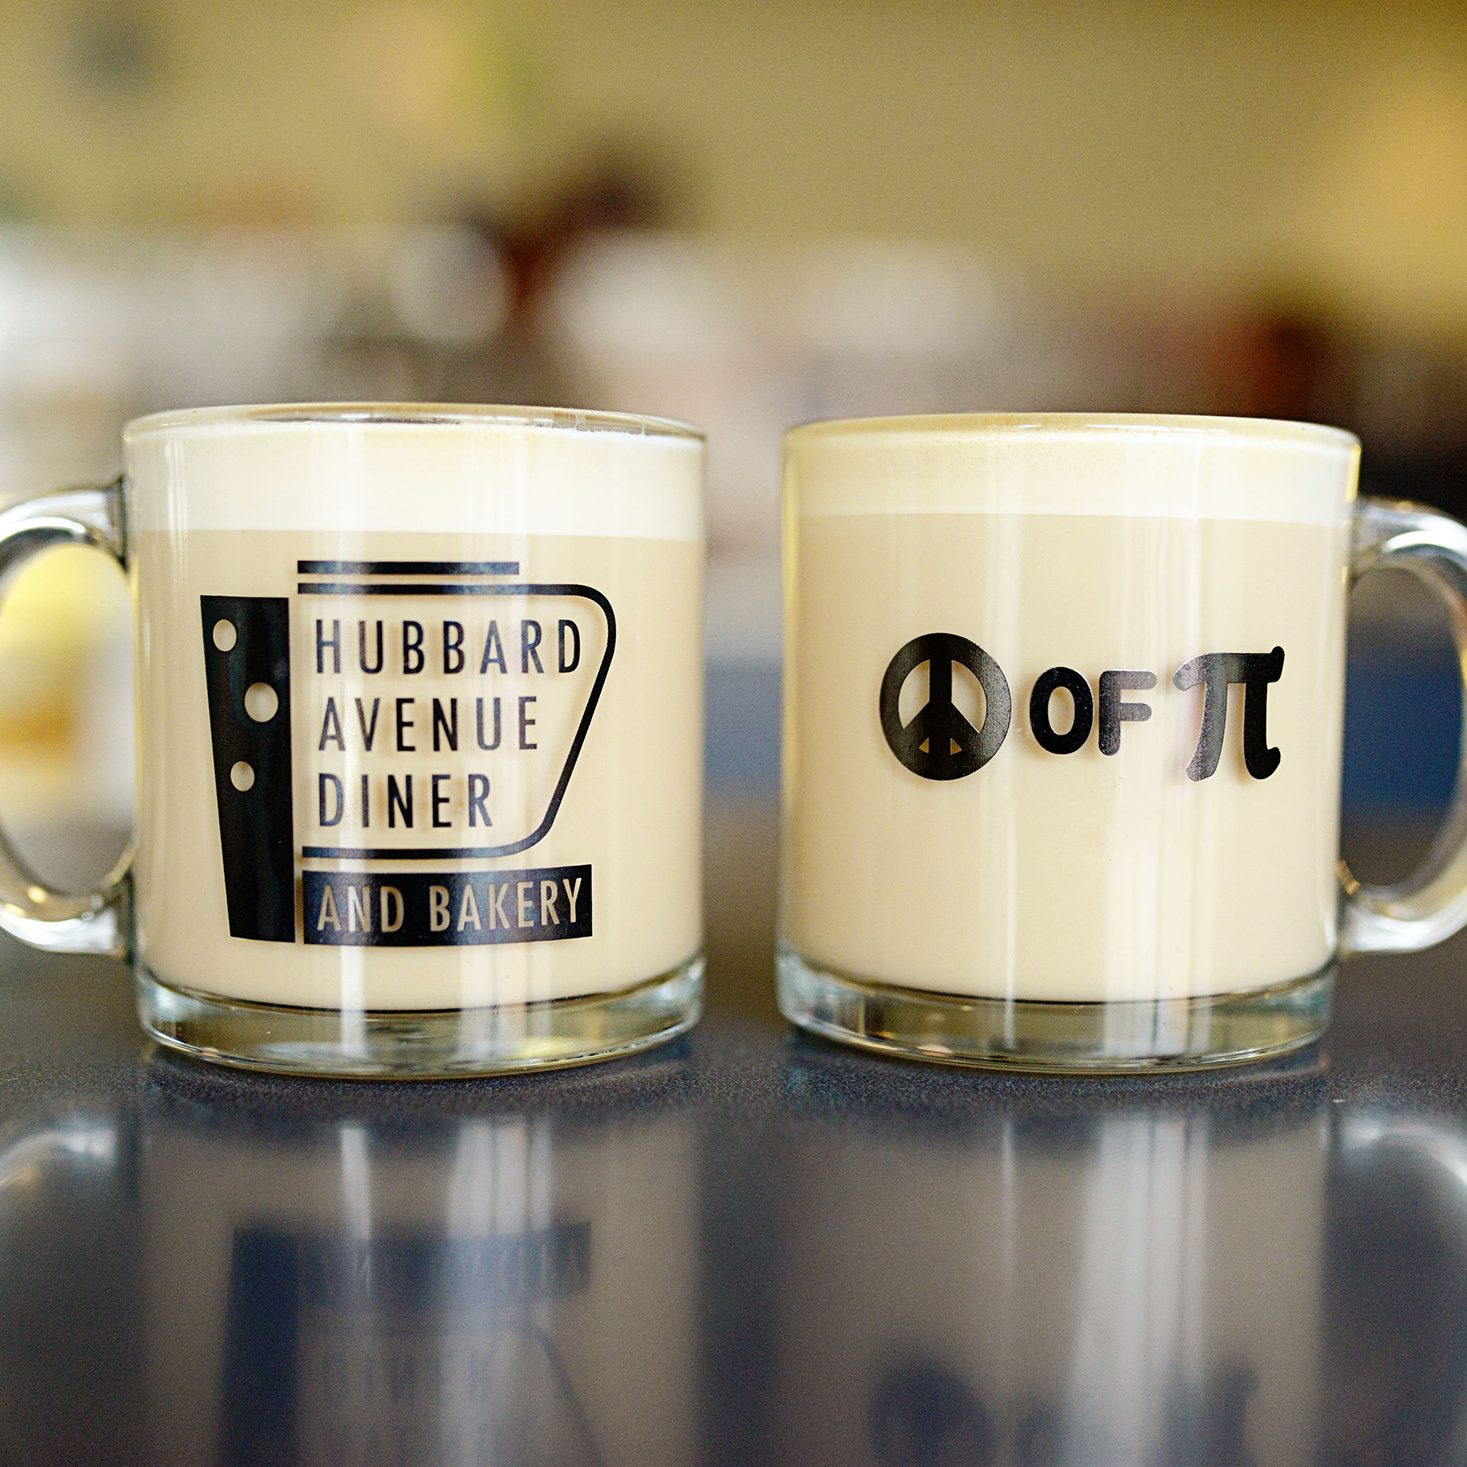 Two mugs sitting on a table.